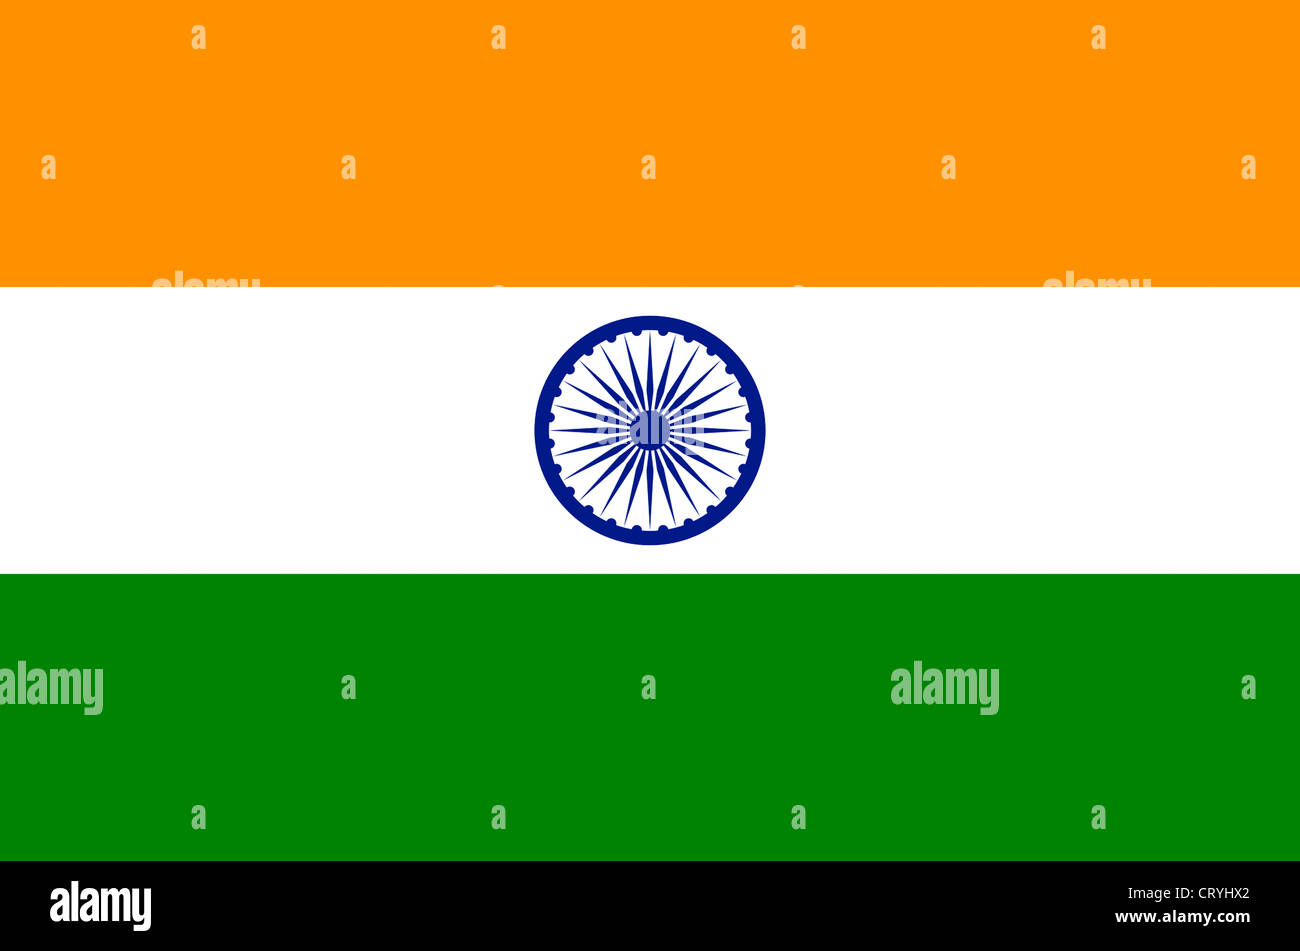 National flag of the Republic of India. Stock Photo